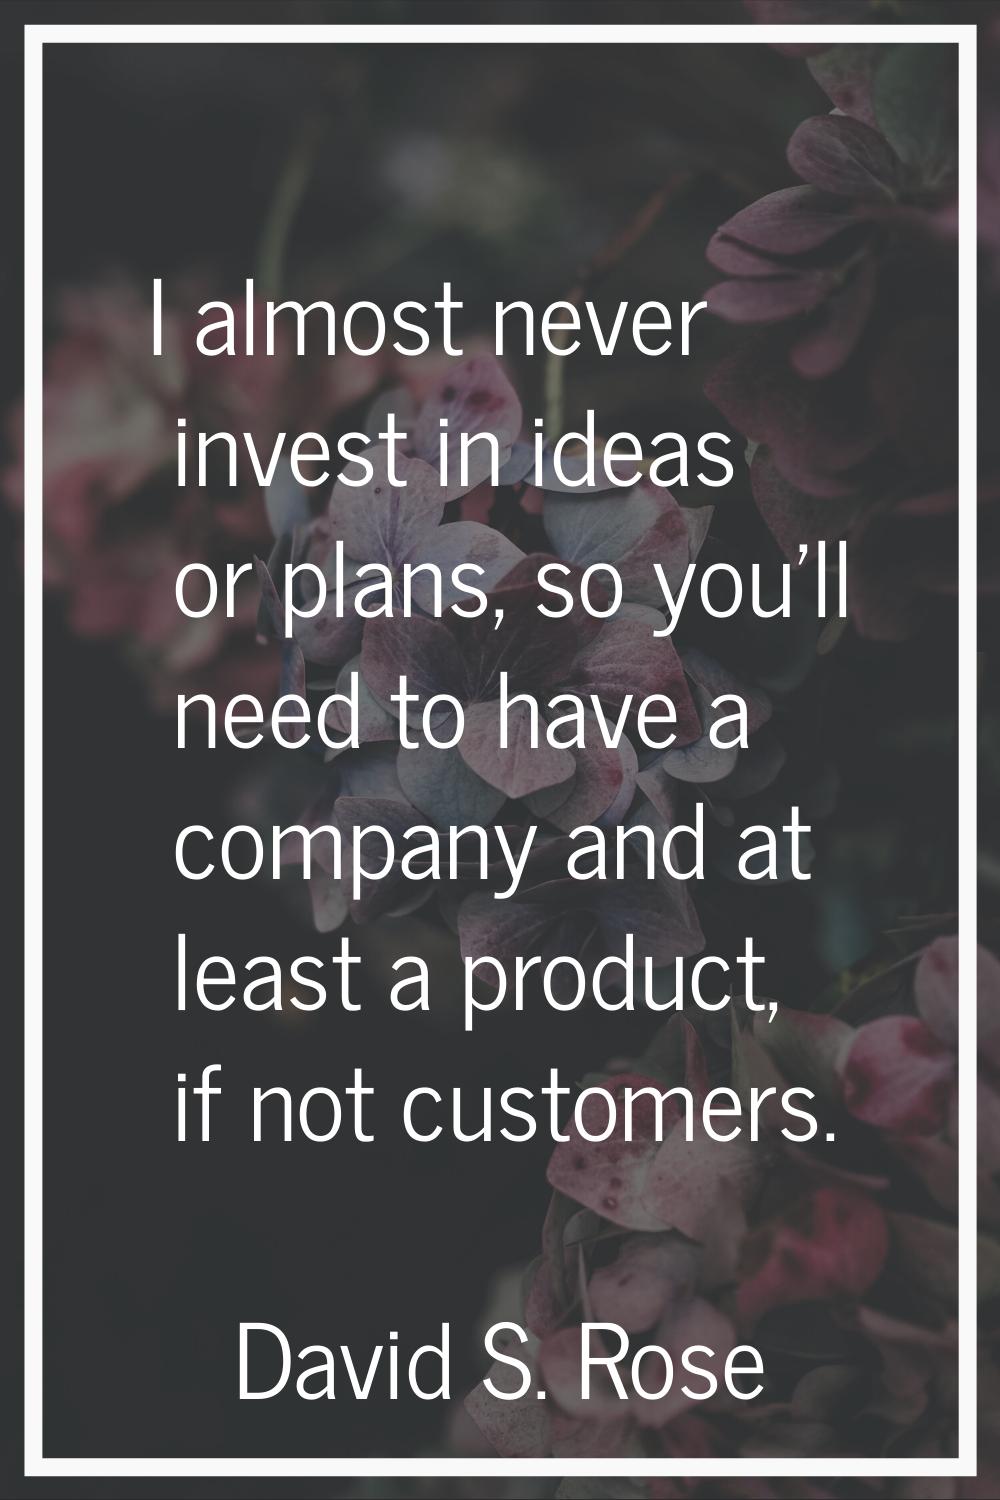 I almost never invest in ideas or plans, so you'll need to have a company and at least a product, i